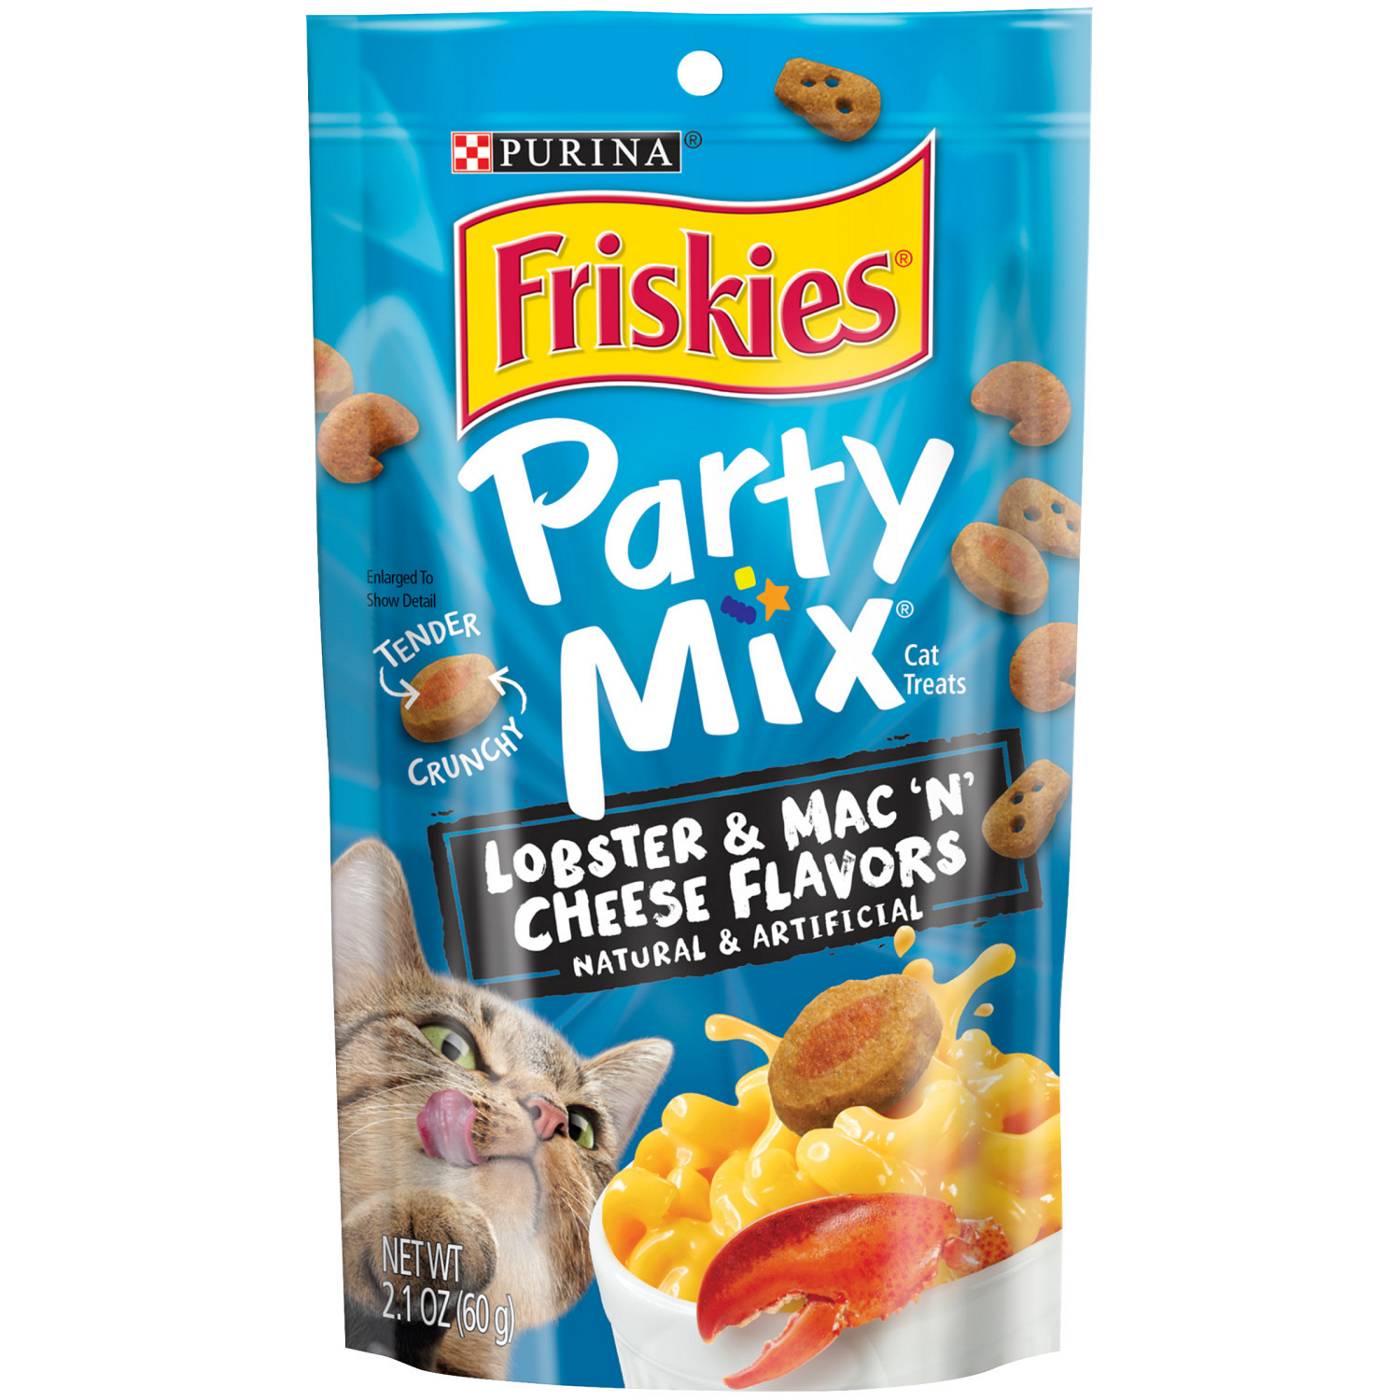 Friskies Purina Friskies Made in USA Facilities Cat Treats, Party Mix Lobster & Mac 'N' Cheese Flavors; image 1 of 10